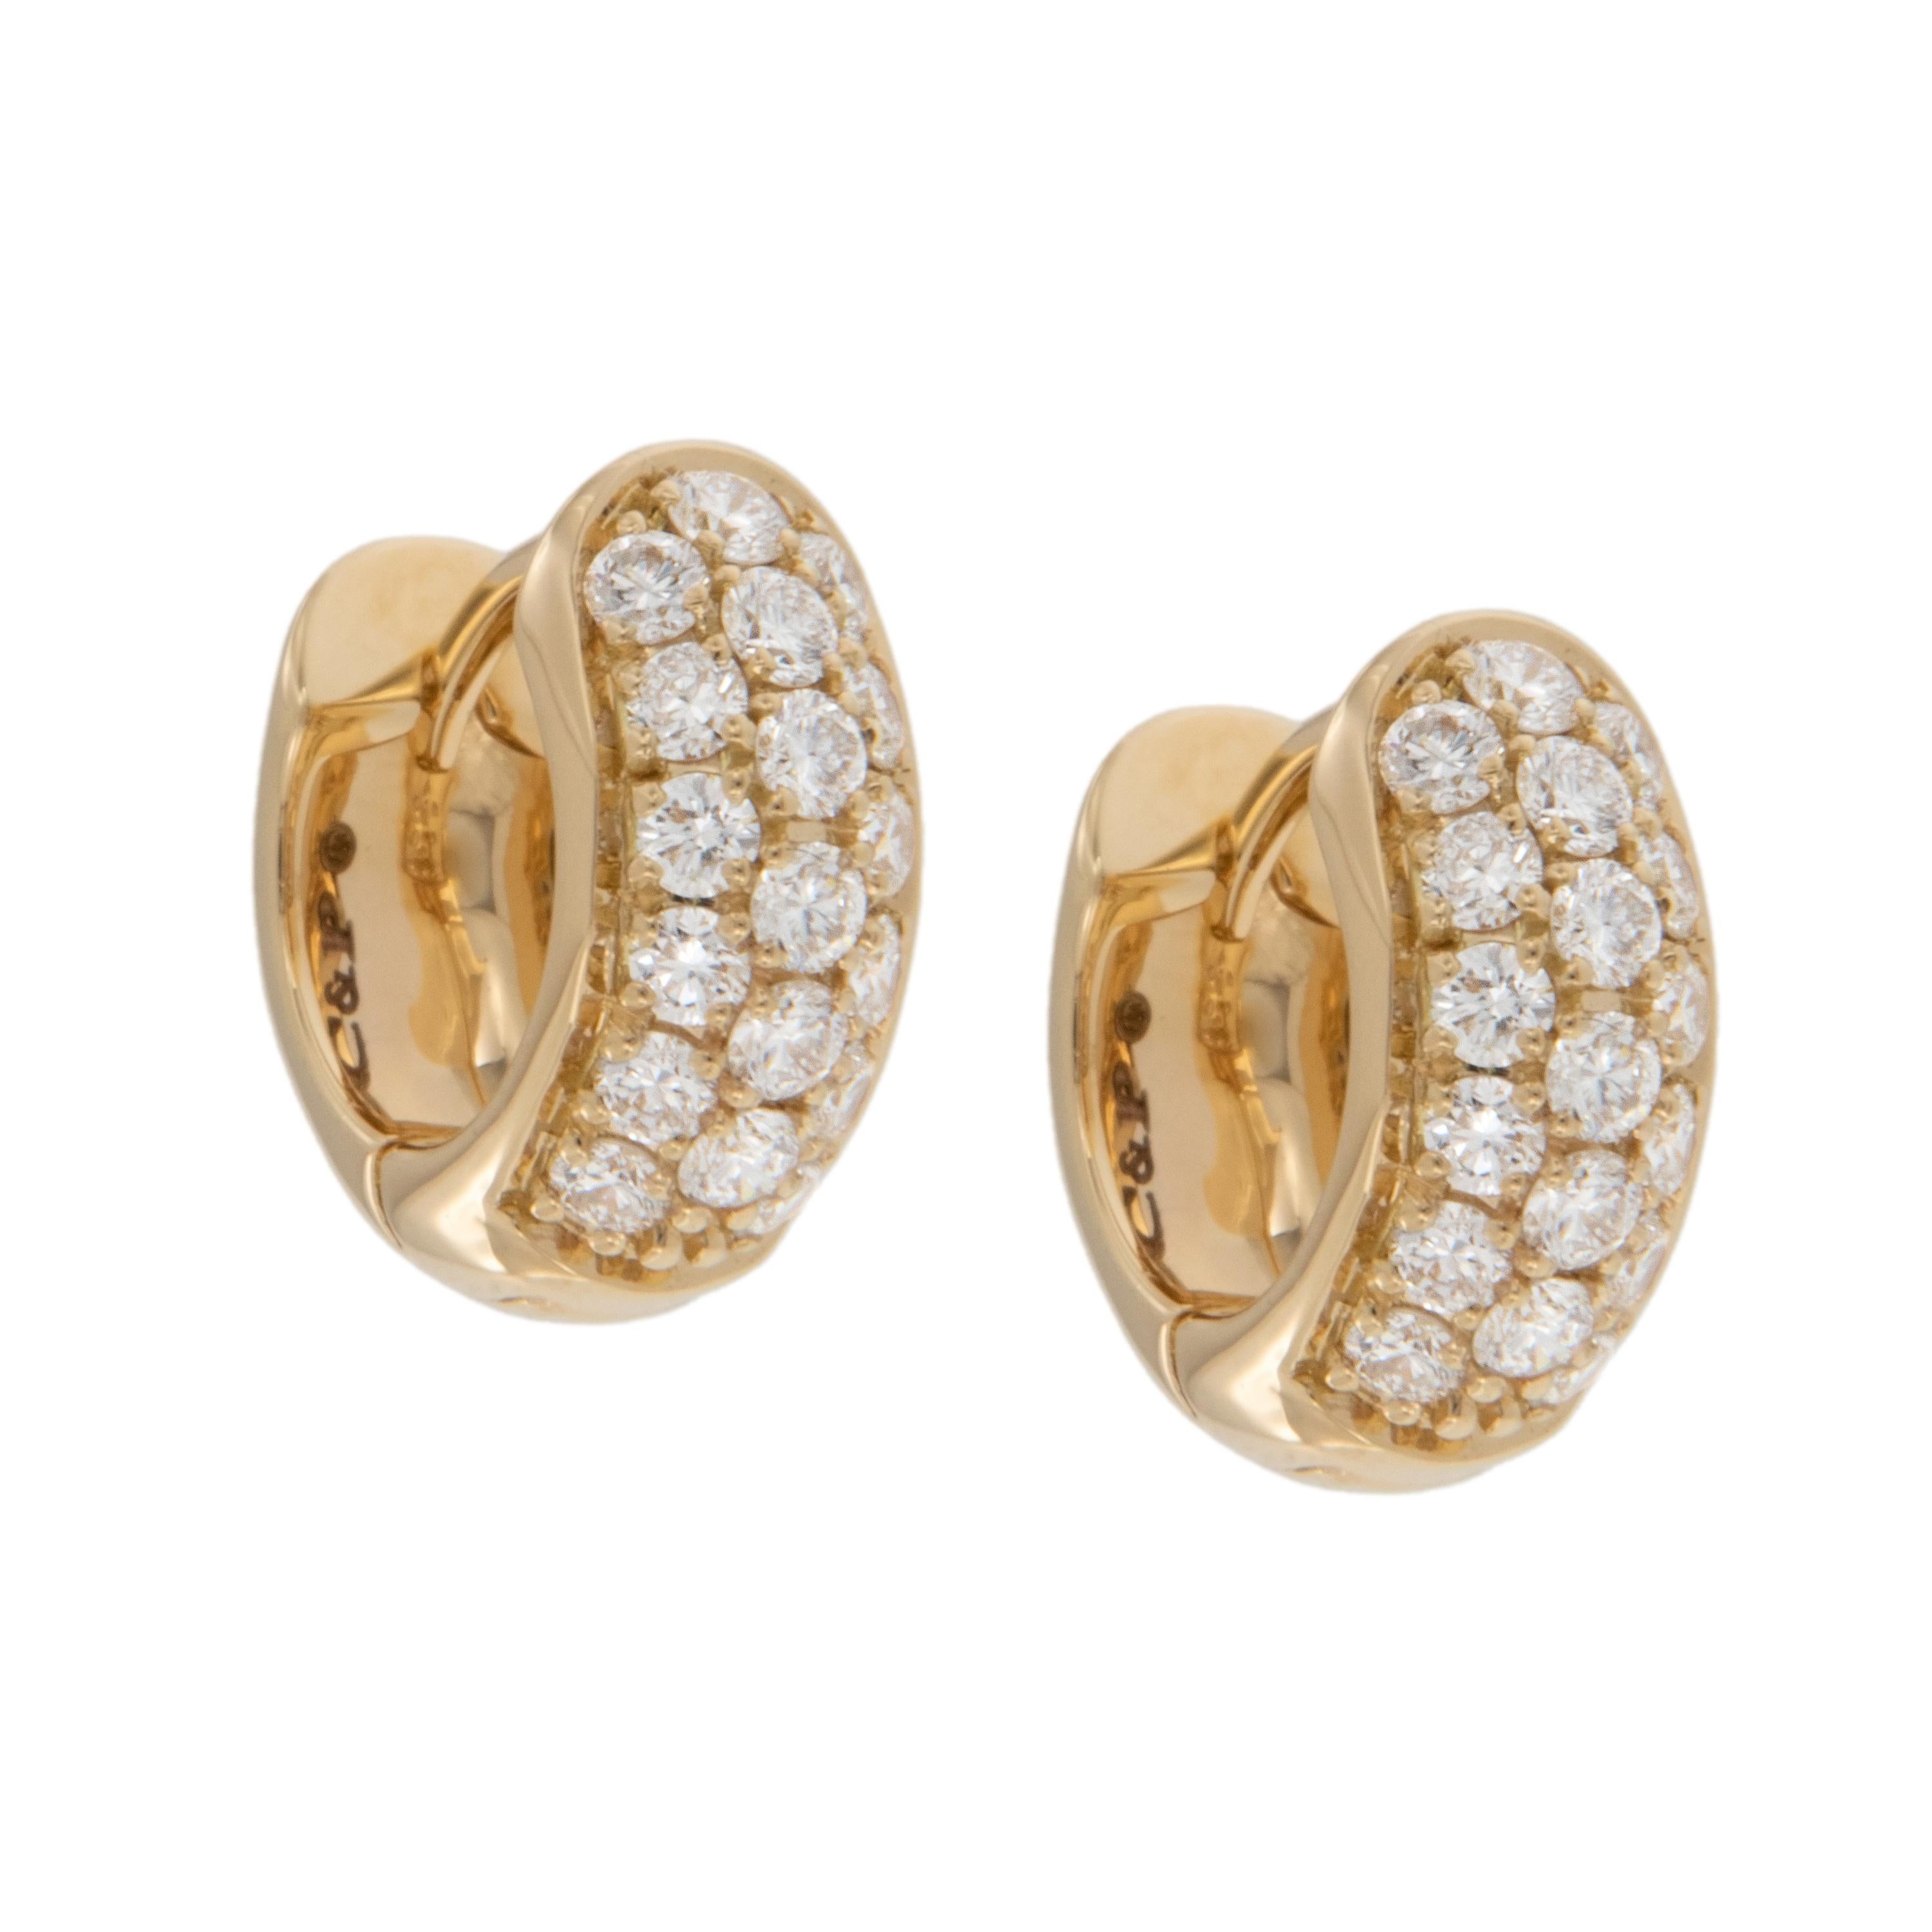 Beautiful pave' diamond earrings that will be the most comfortable earrings you own too! Made from fine 18 karat yellow gold, these huggy earrings boast 0.48 Cttw. of VS clarity, G-H color diamonds for earrings that look paved with diamonds.